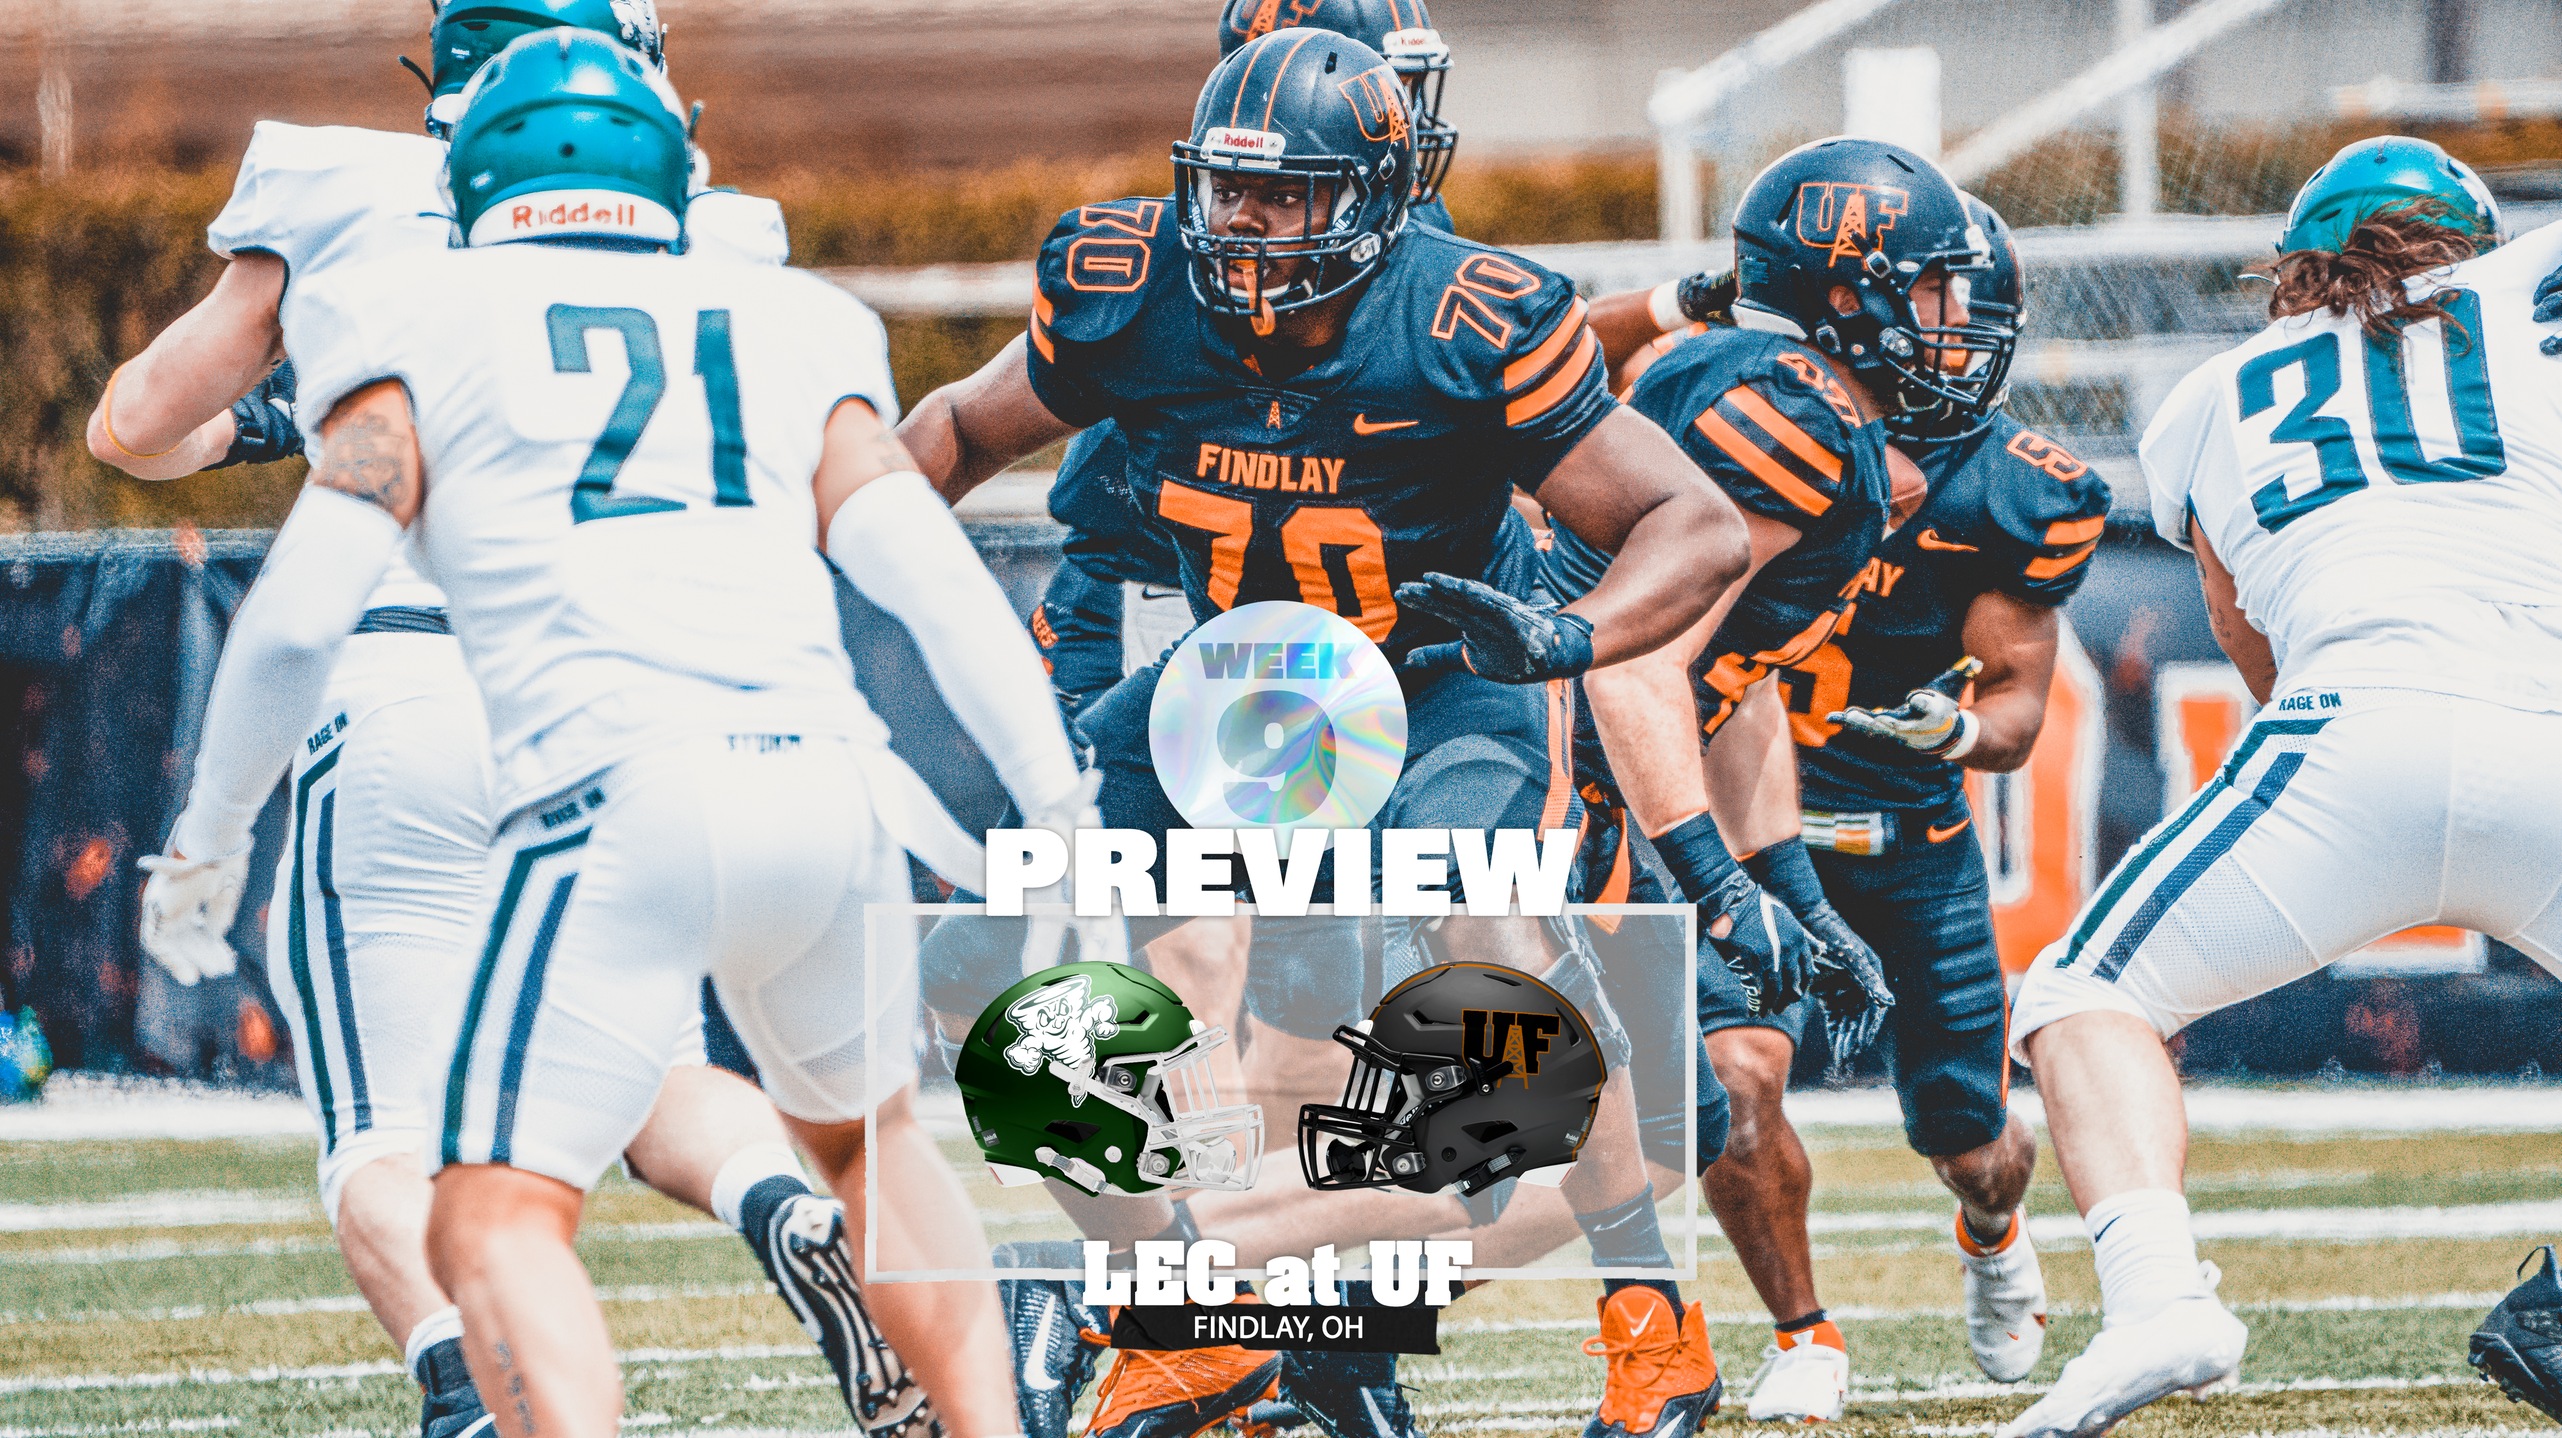 Week 9 Preview | Oilers Seek Fourth Consecutive Win as Lake Erie Invades Donnell Stadium